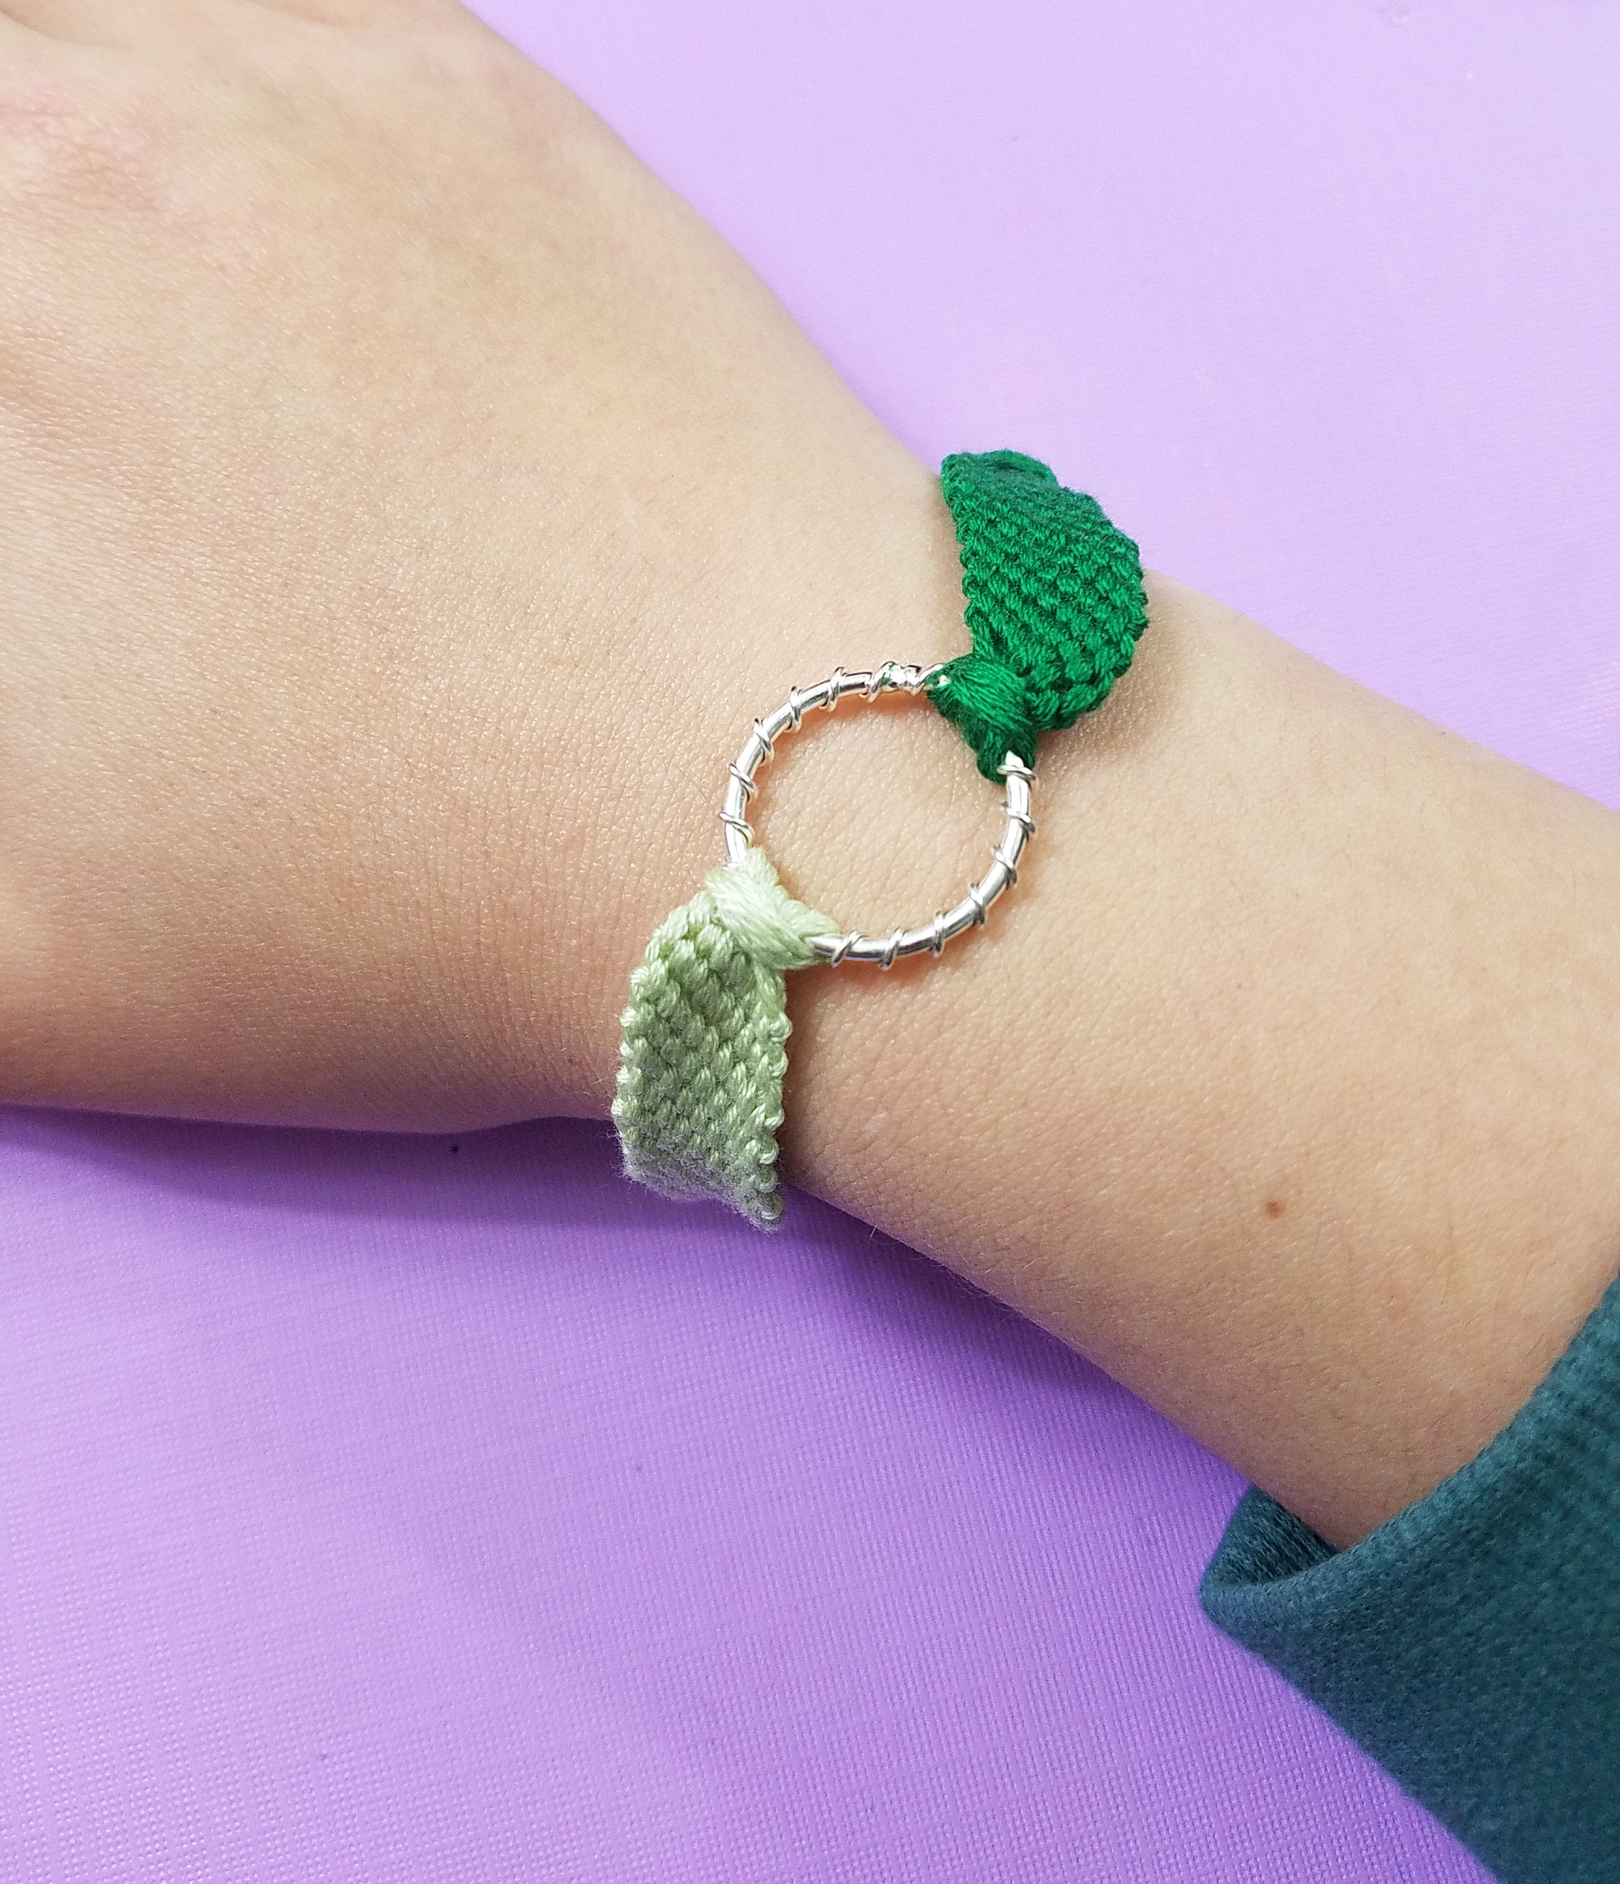 How To Make Adorable Loopdedoo Friendship Bracelets In Just A Few Minutes